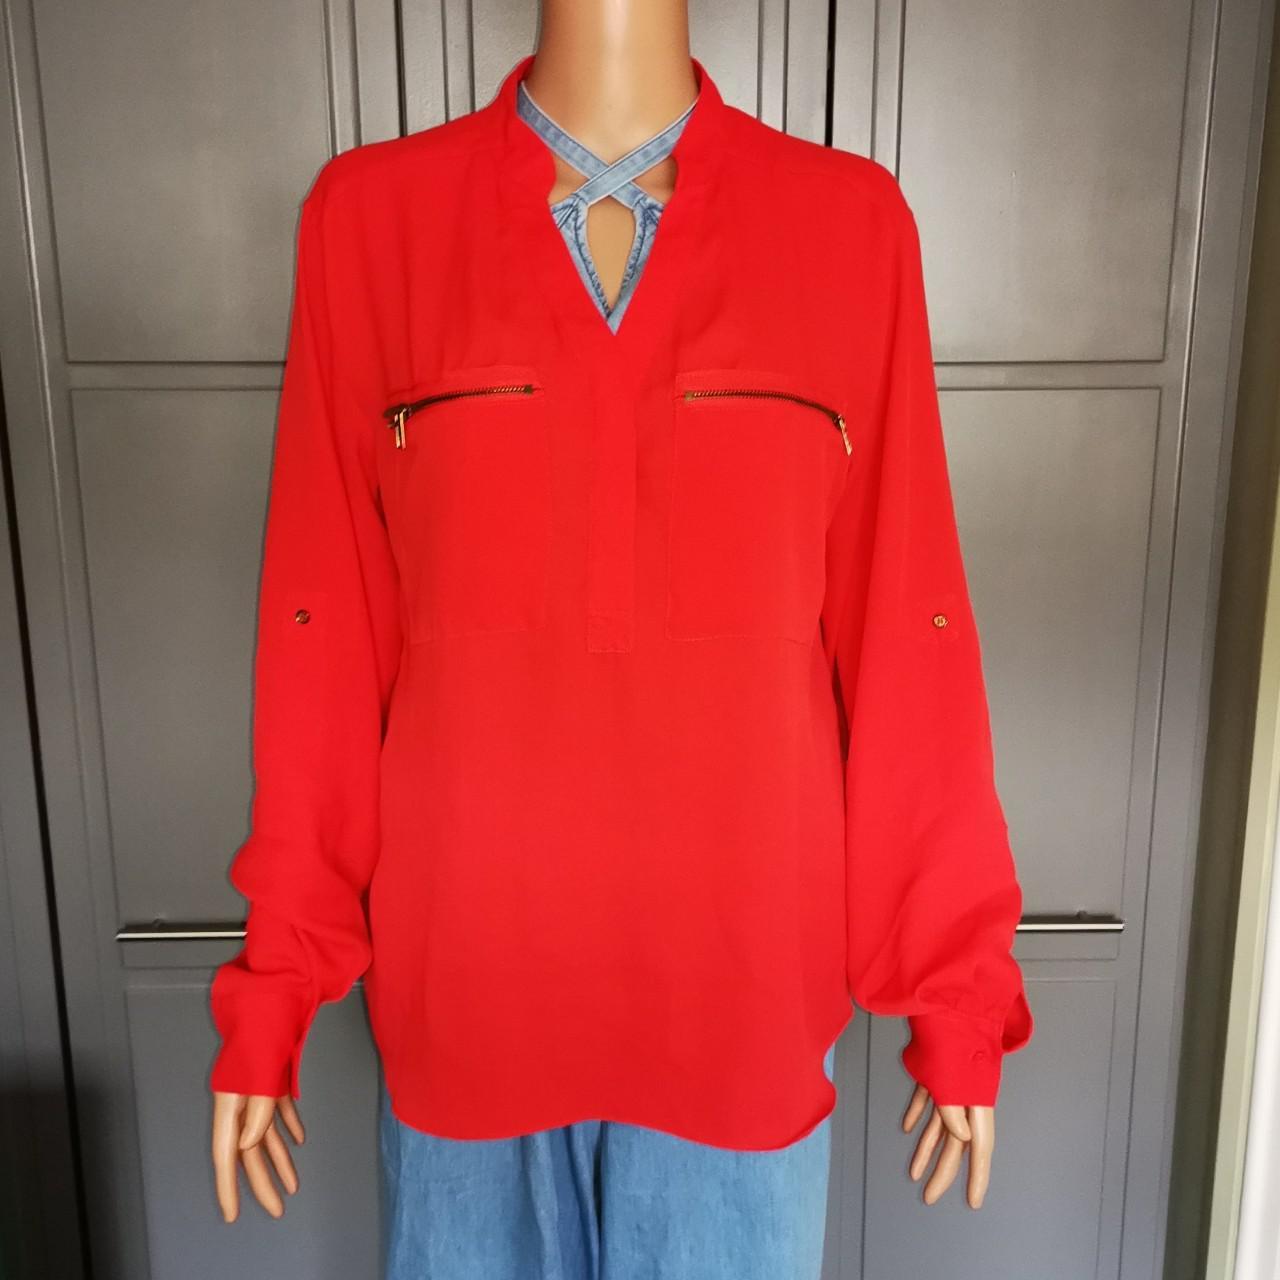 Next Women's Red Blouse (4)